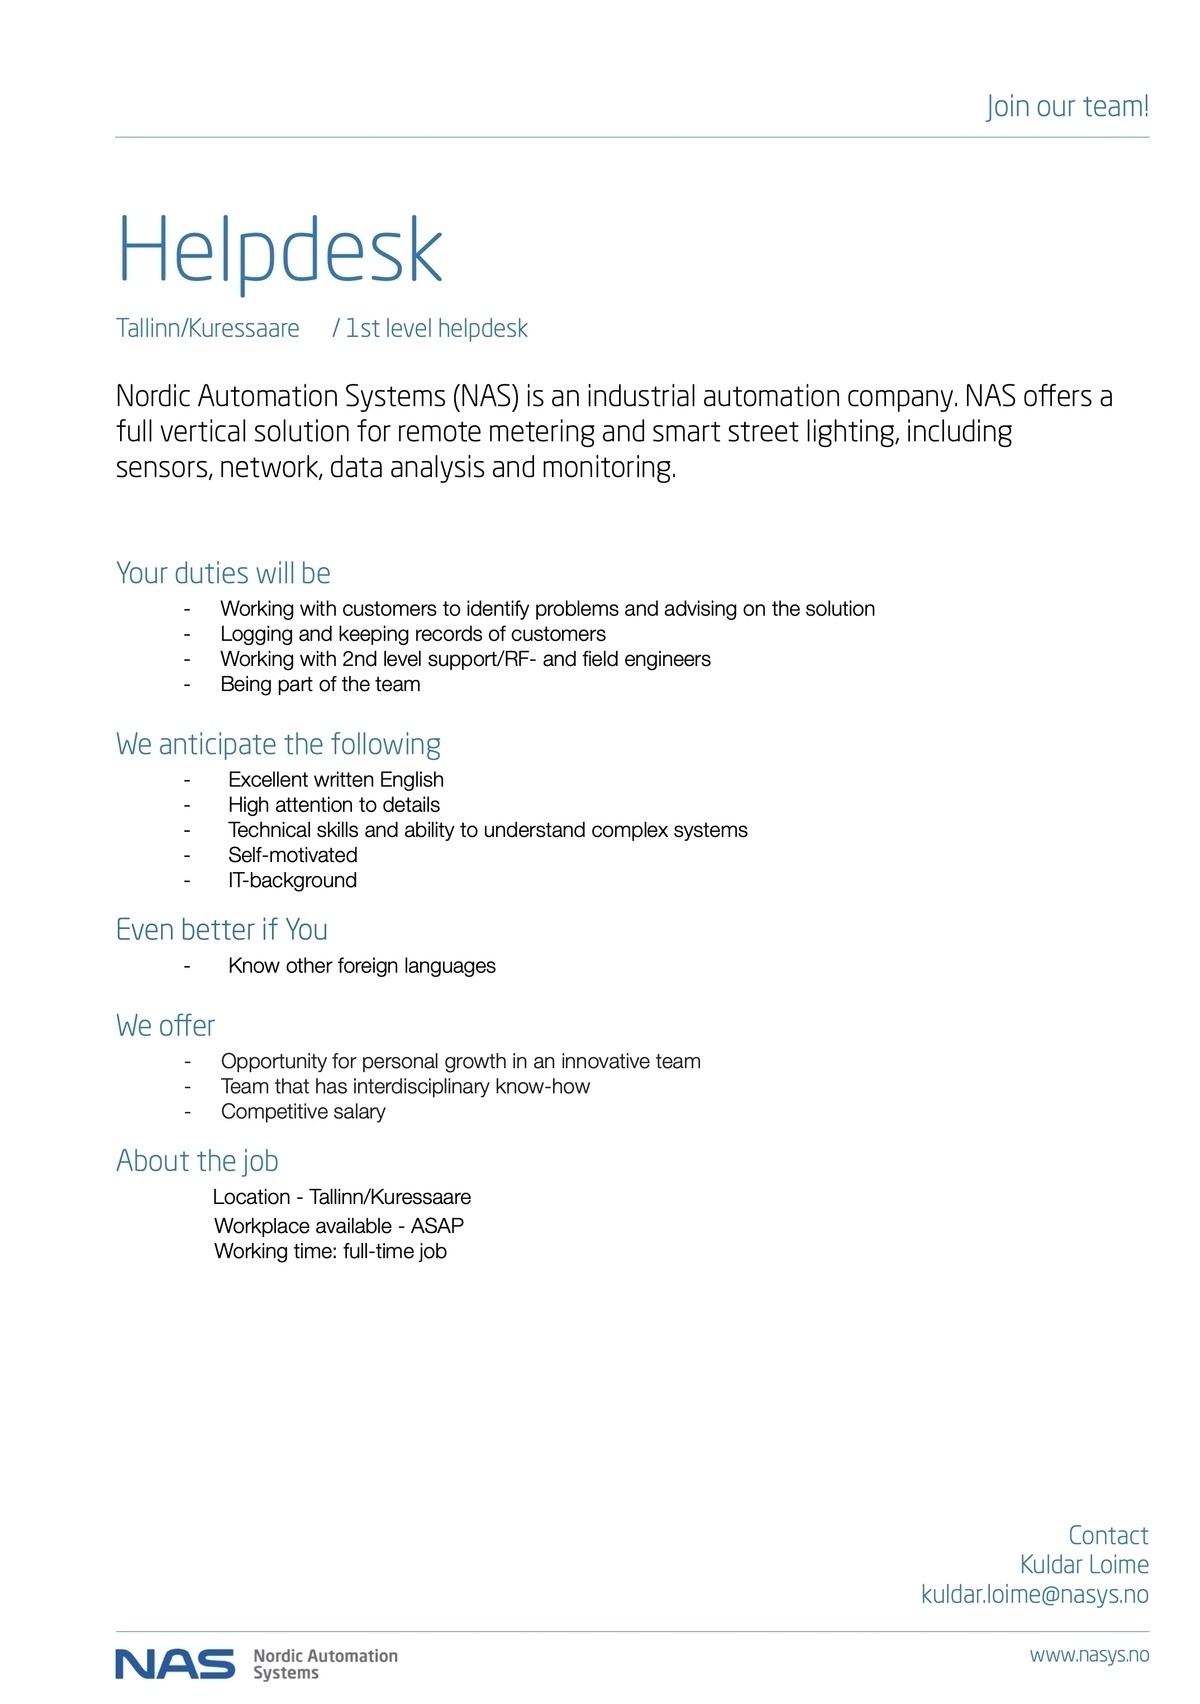 Nordic Automation Systems Helpdesk